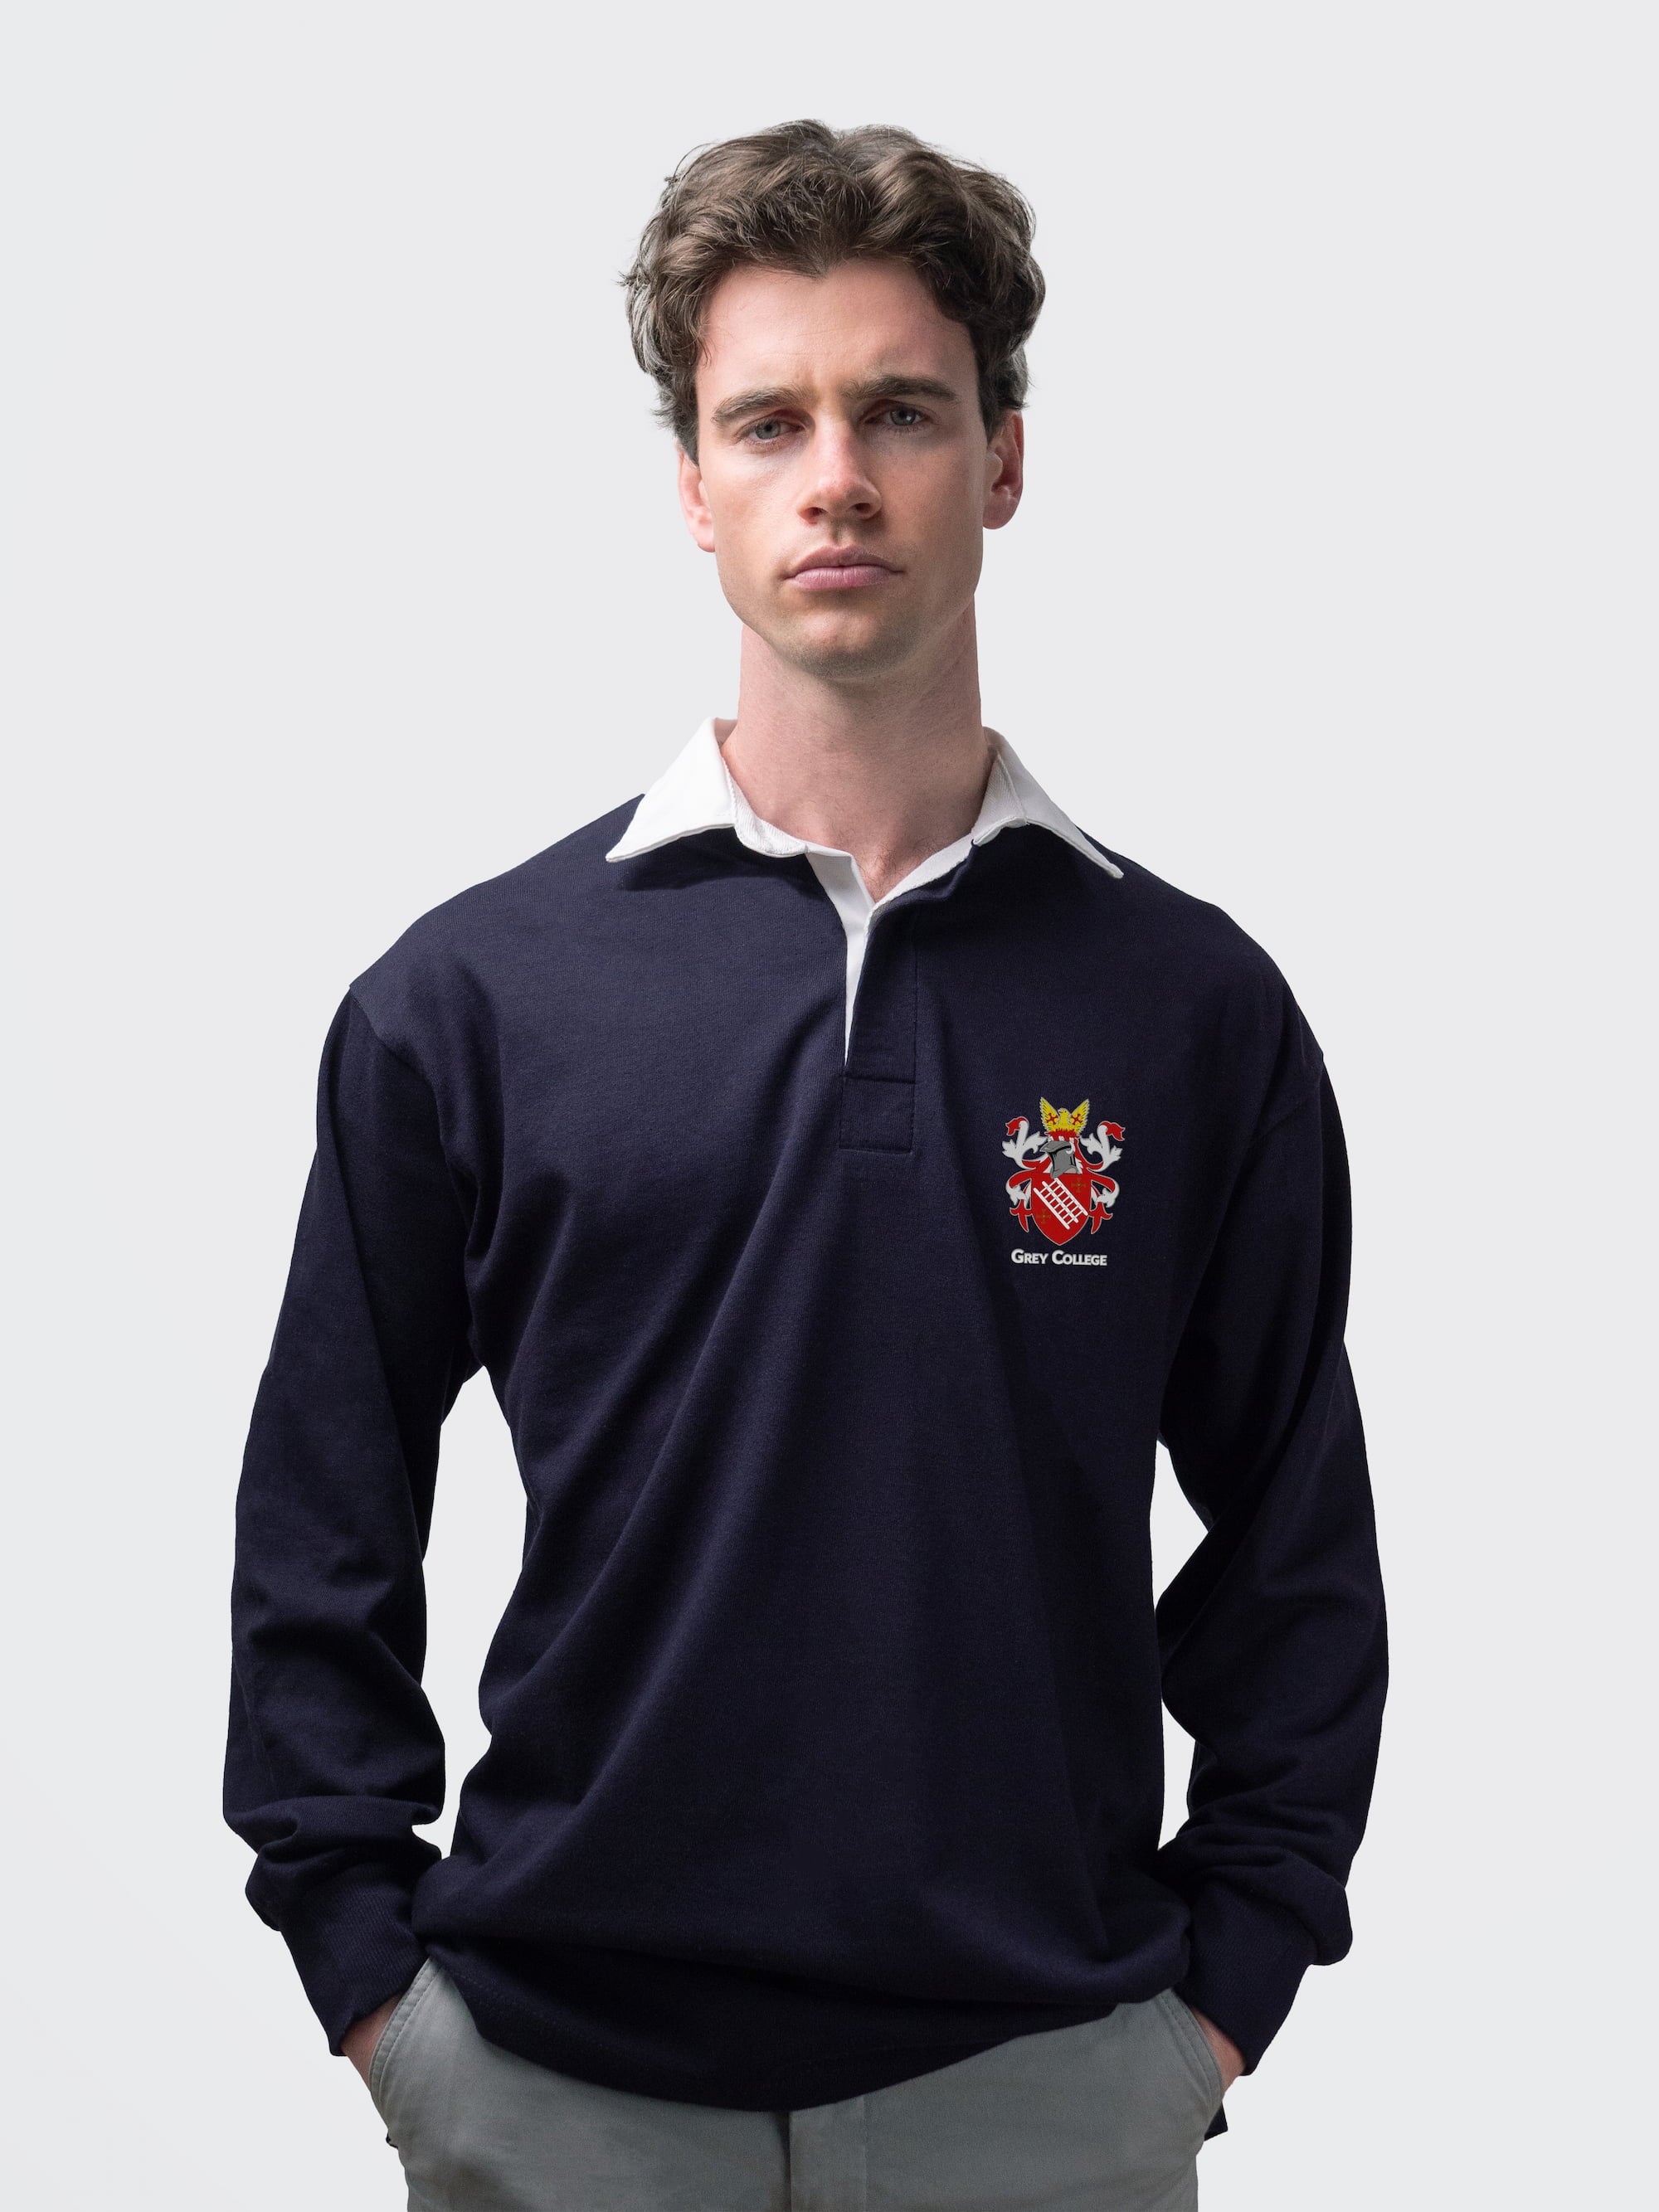 Grey College student wearing an embroidered mens rugby shirt in navy